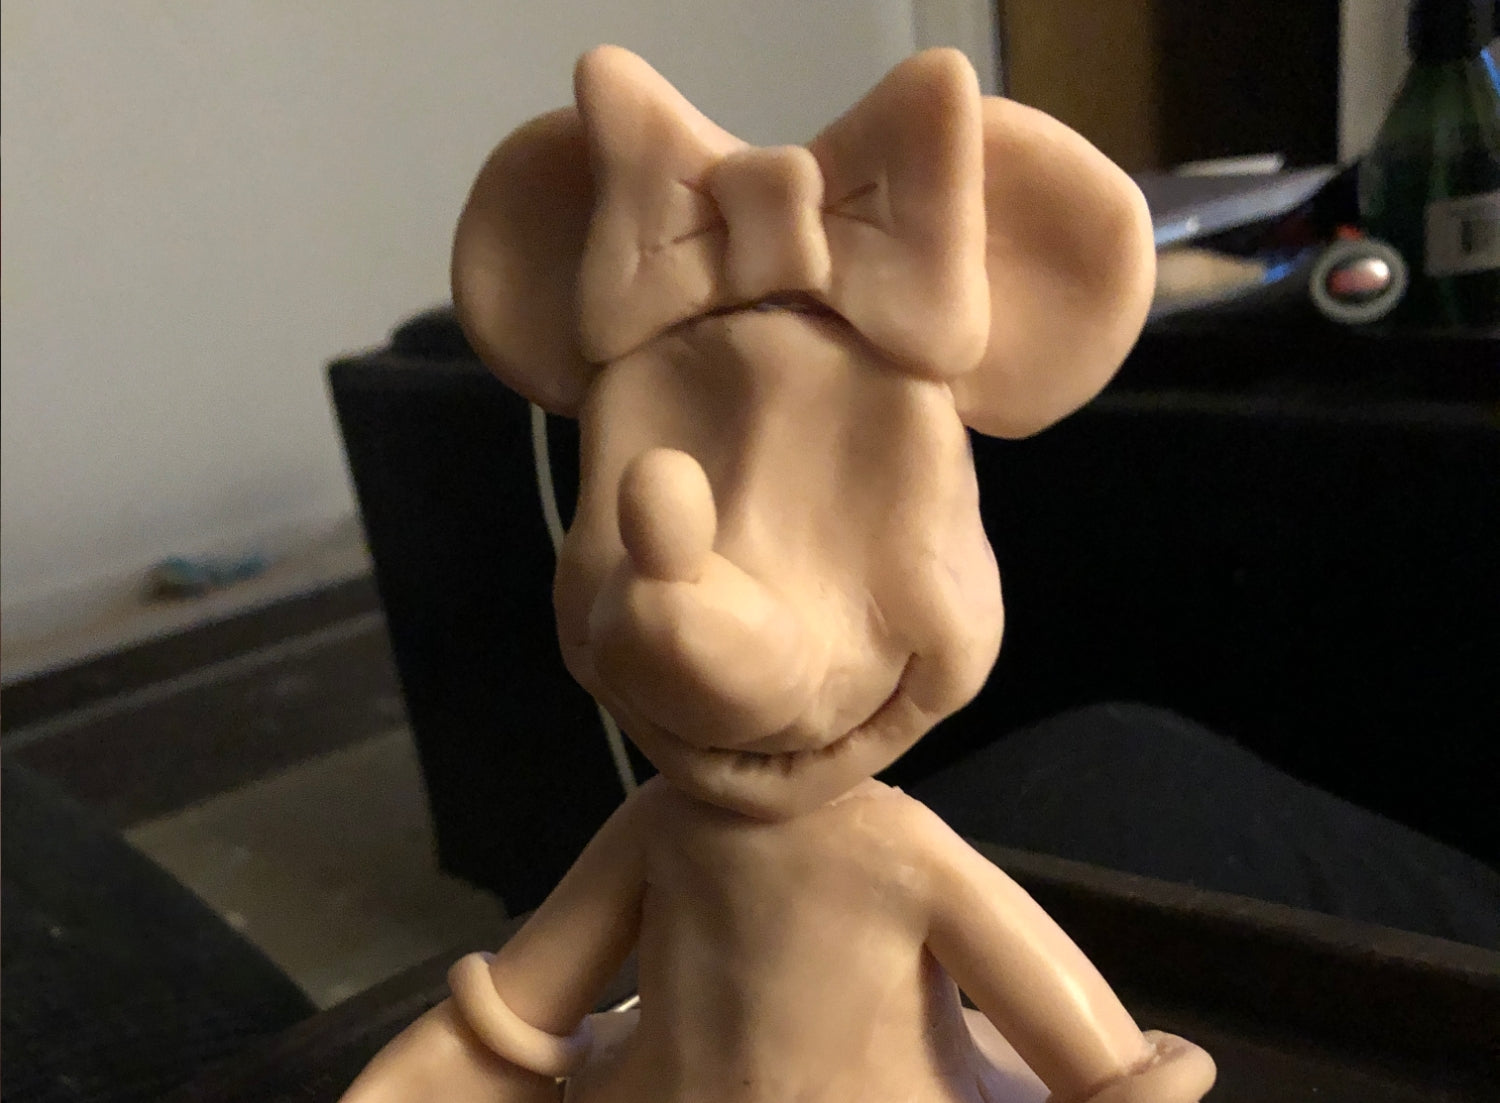 Minnie mouse after head was attached to body.